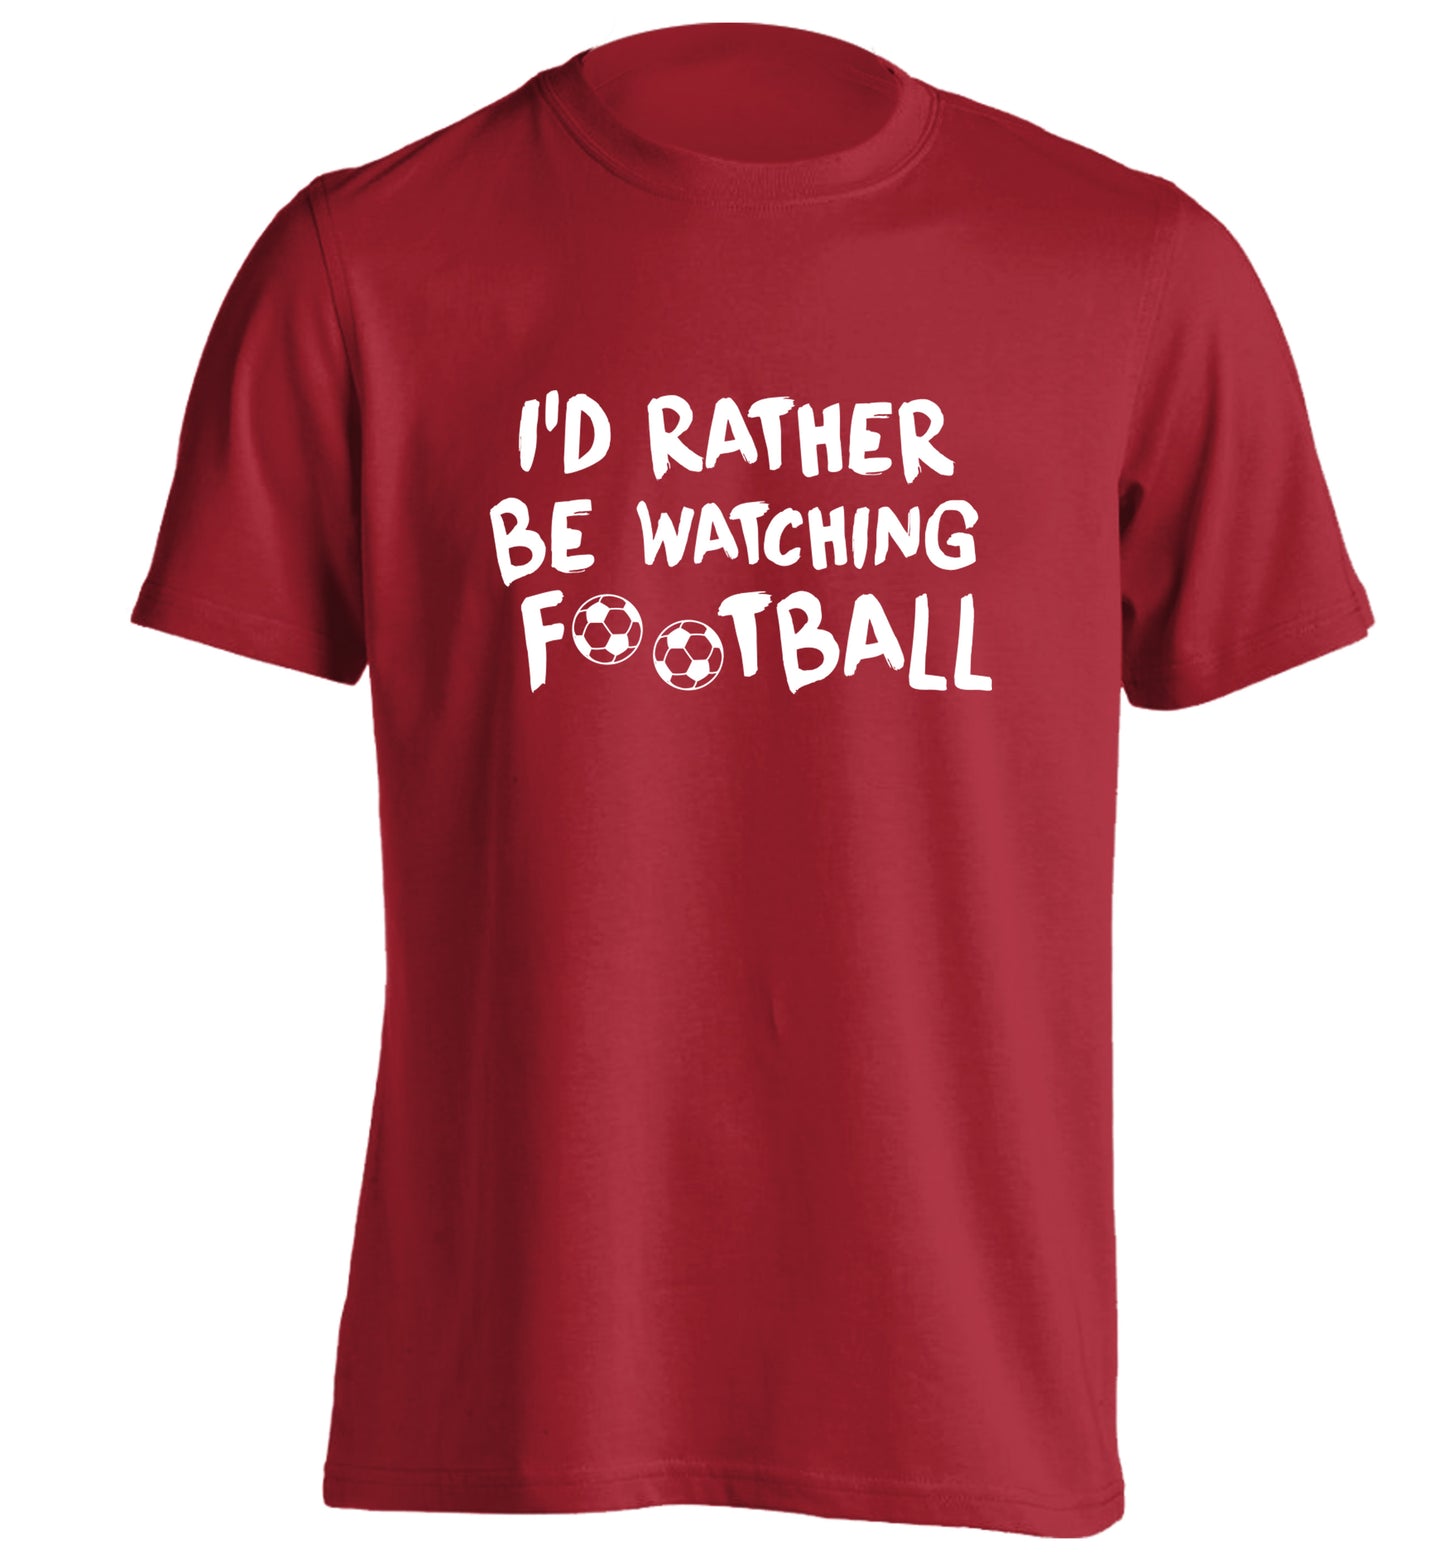 I'd rather be watching football adults unisexred Tshirt 2XL